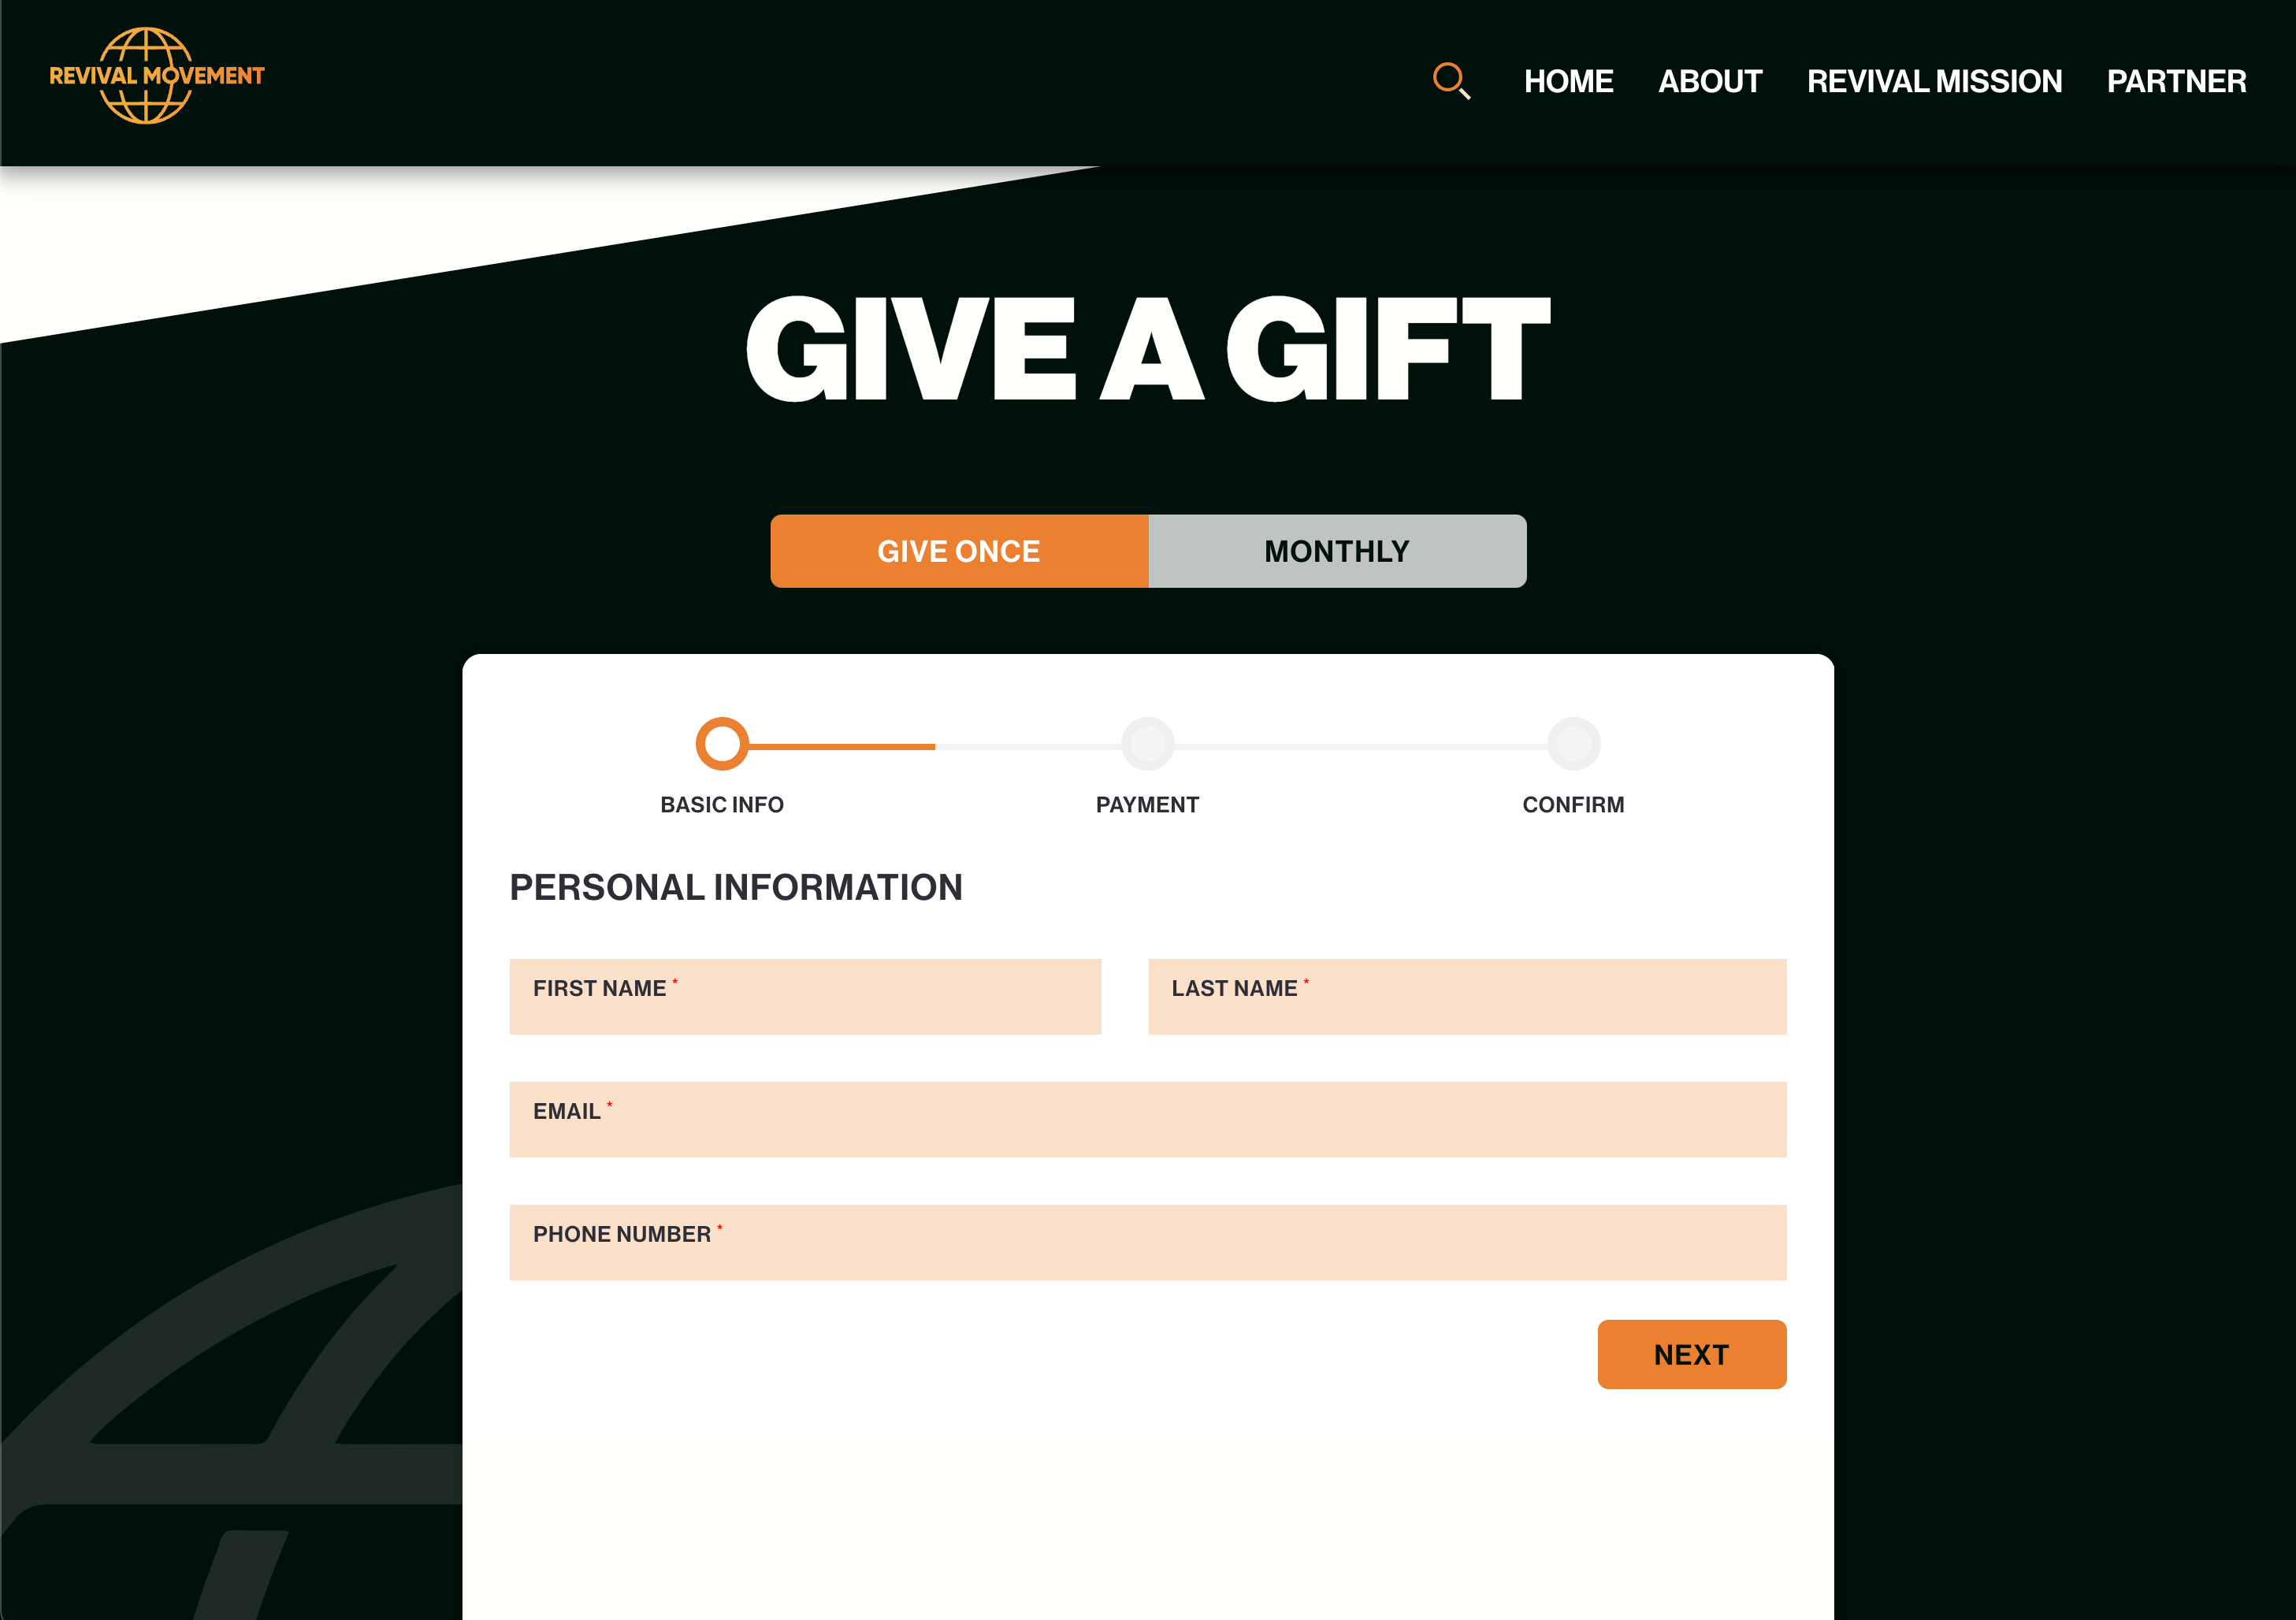 Screenshot of Revival Movement's "Partner" page allowing the user to toggle between one-time and recurring donations.